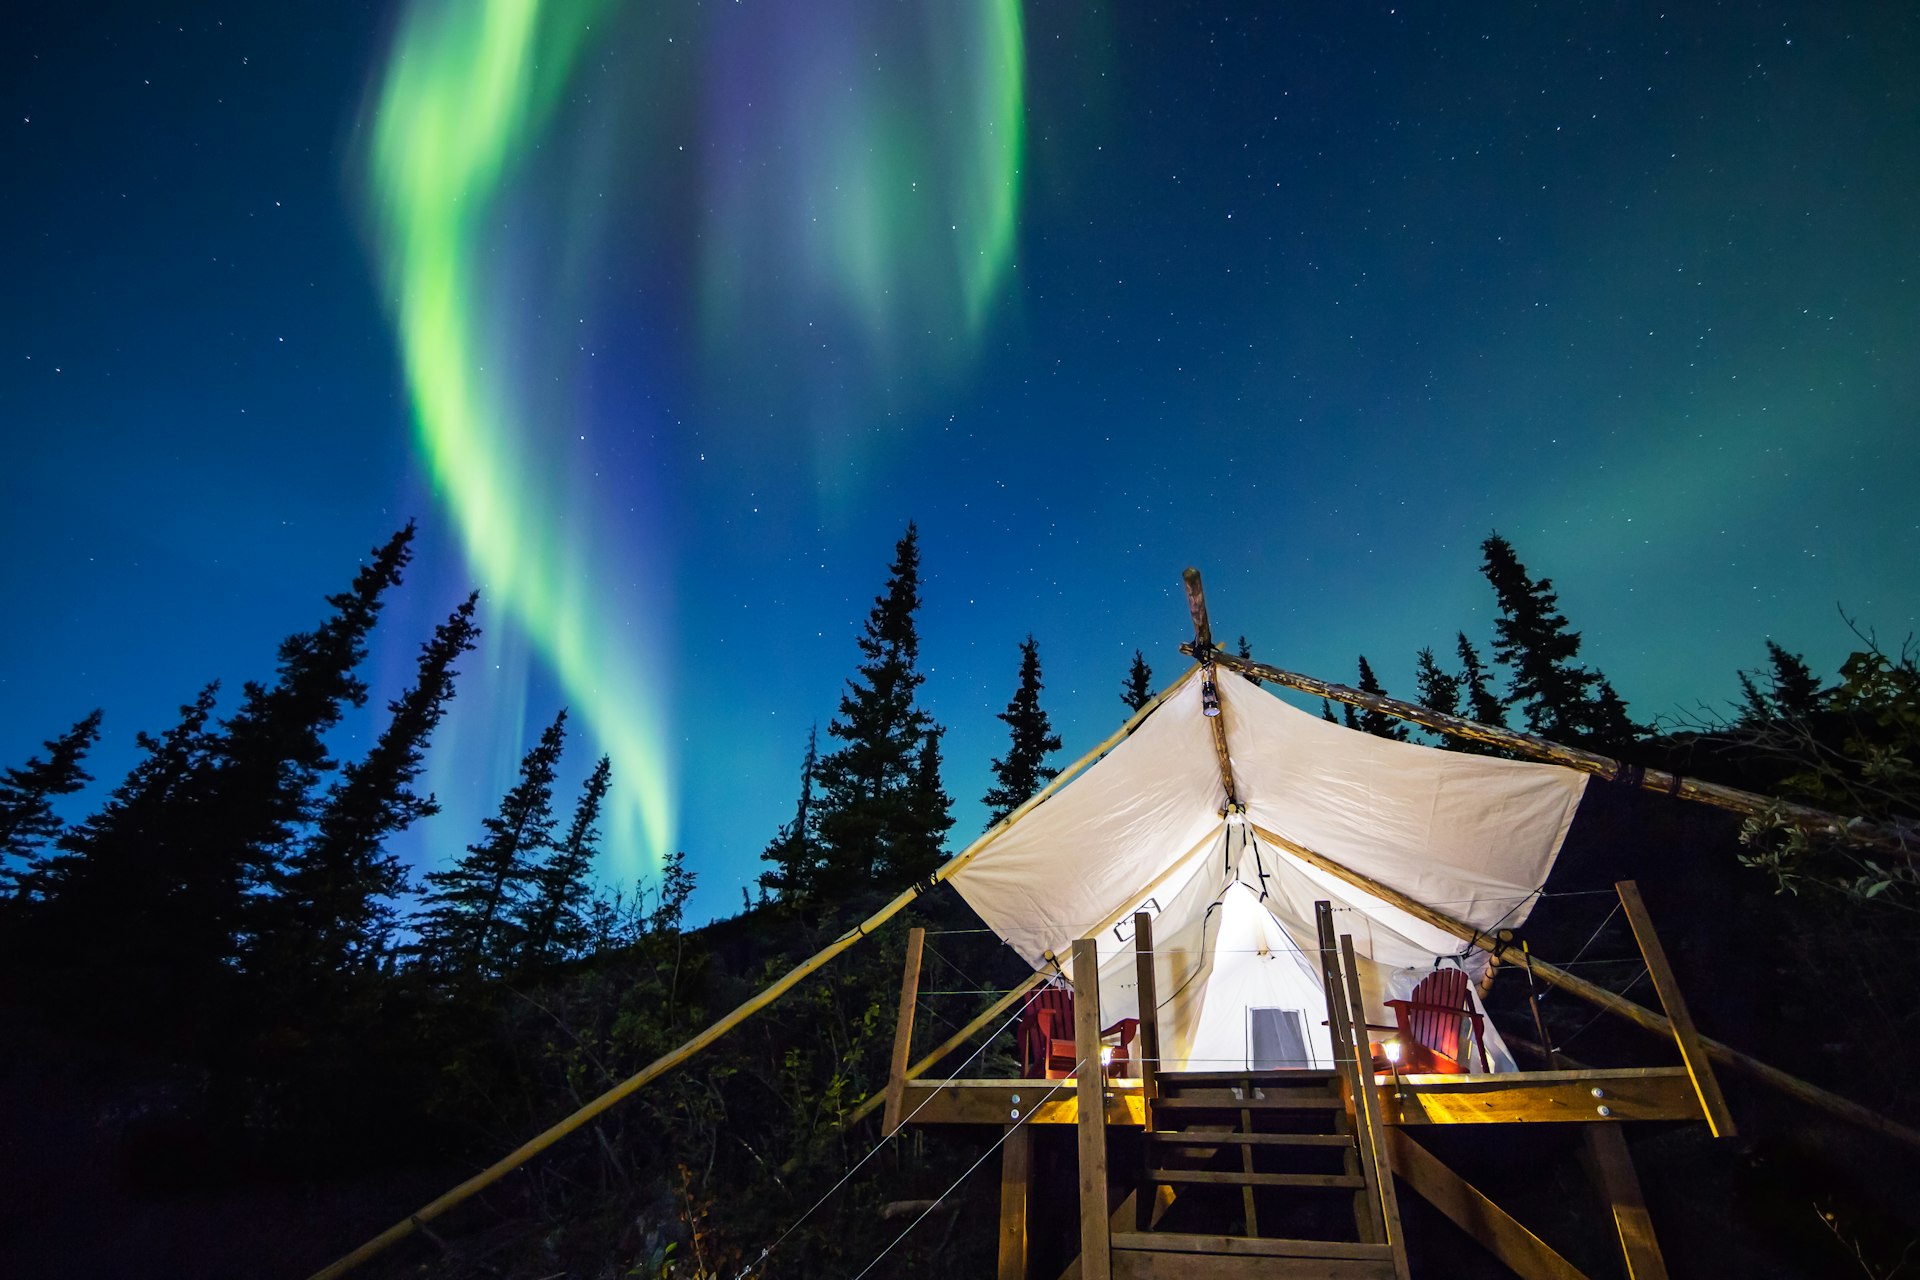 Aurora Borealis glowing green and pink over a large canvas luxury camping tent in Alaska